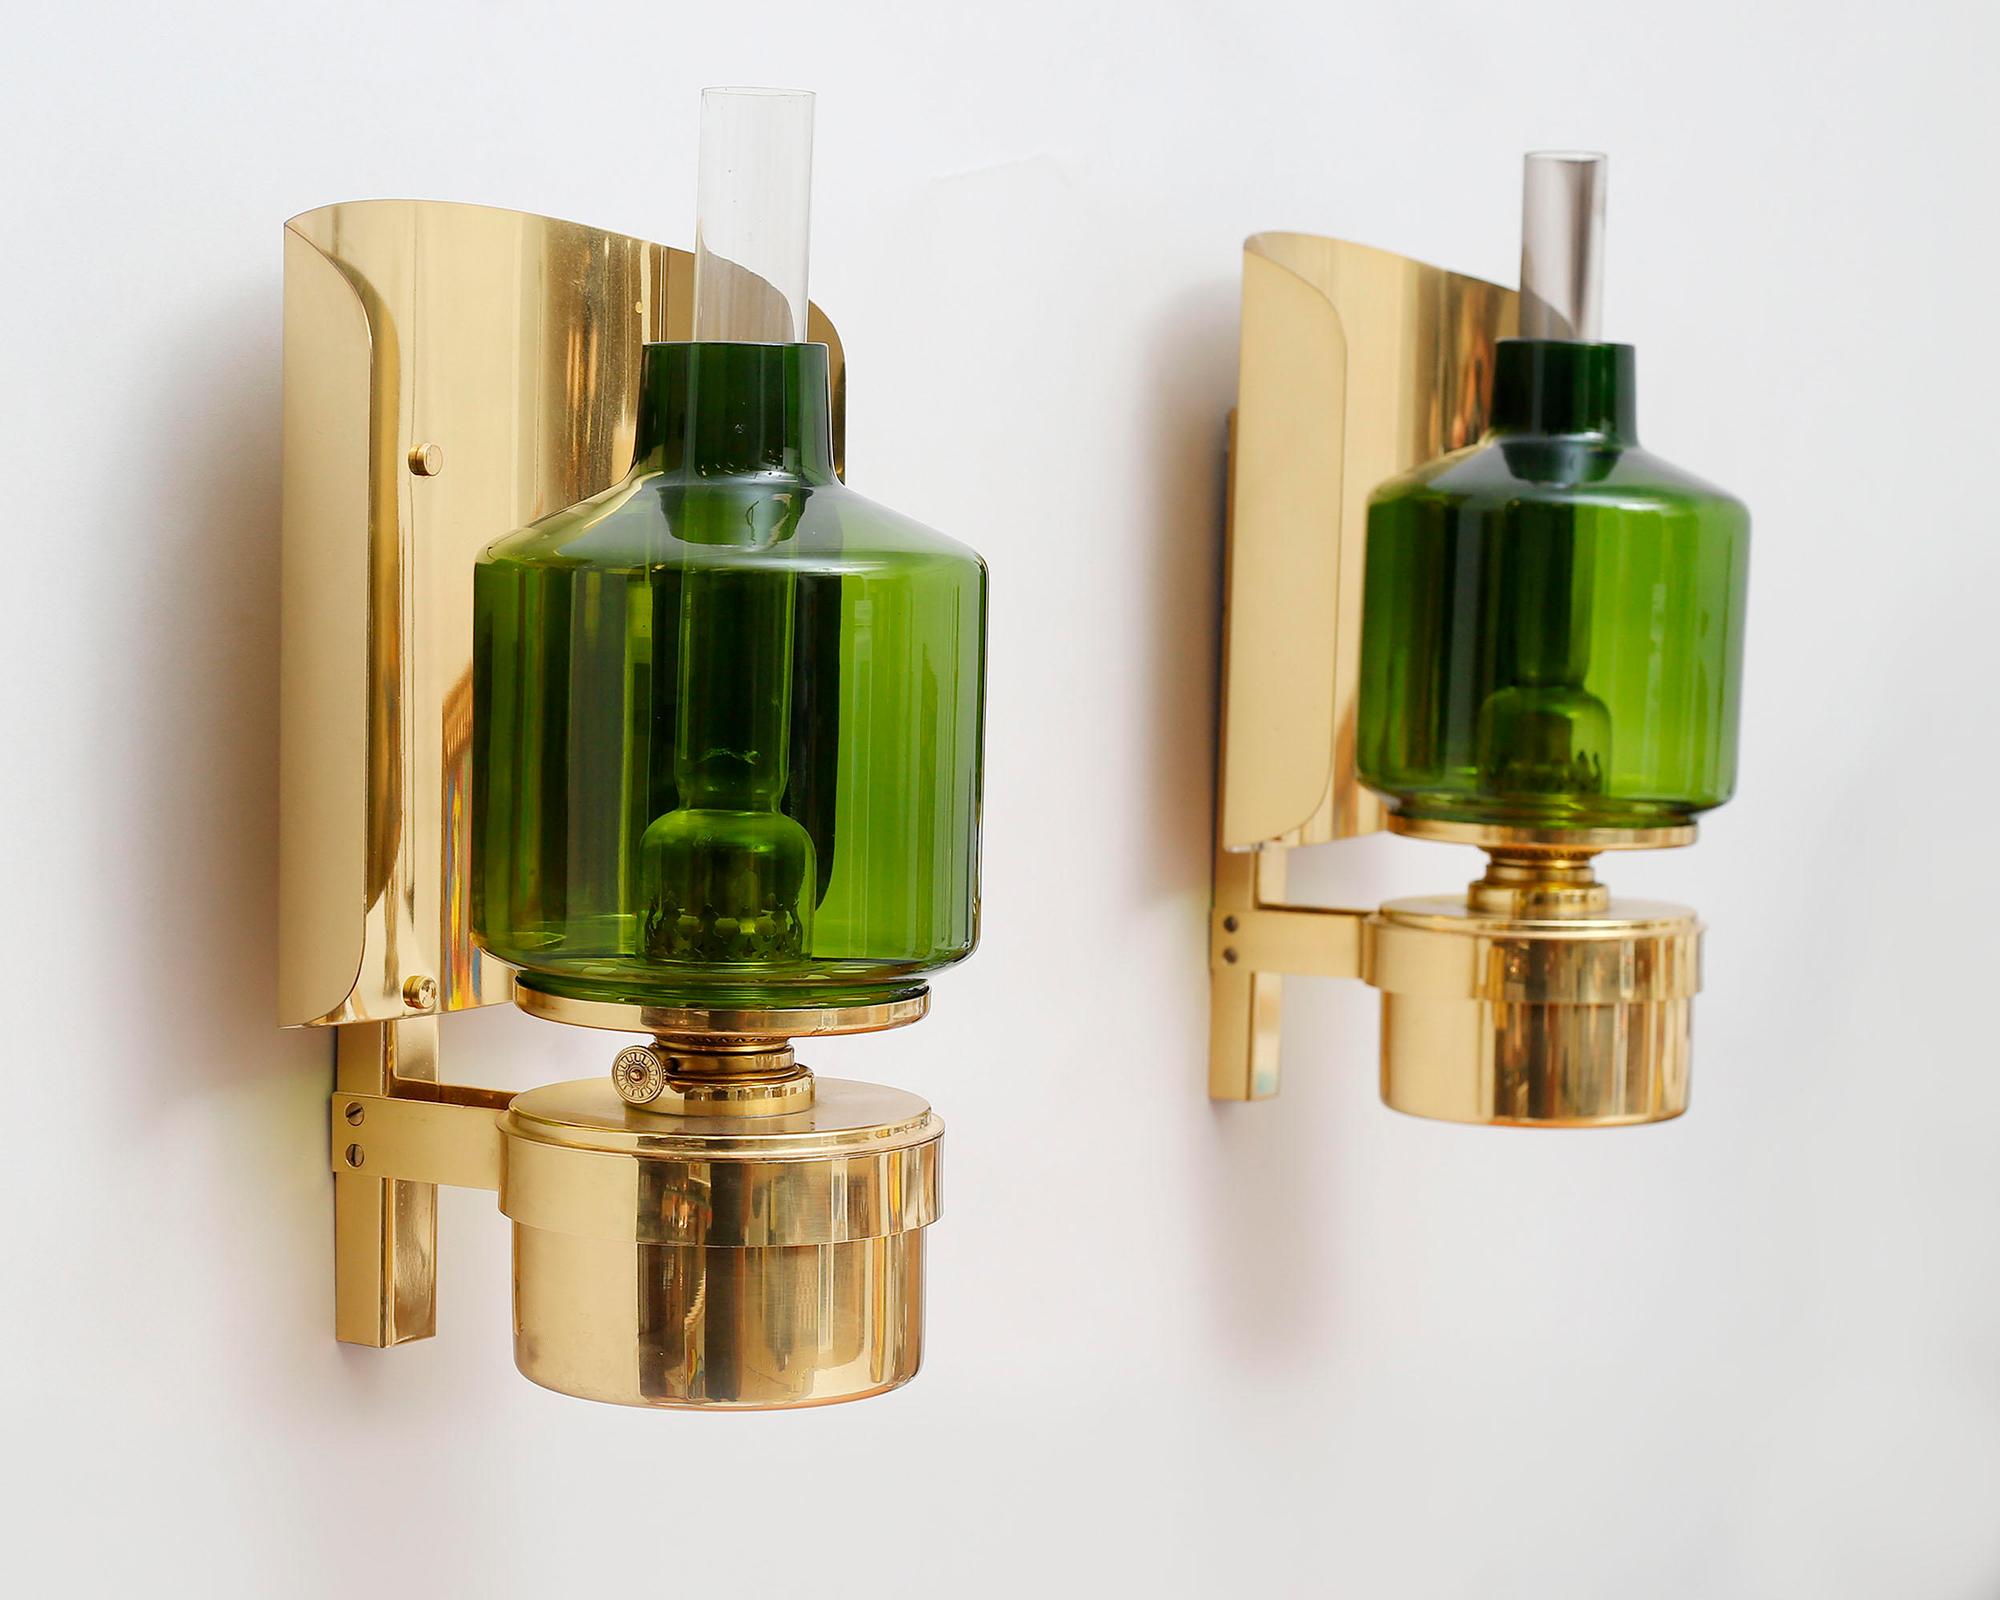 Pair of Scandinavian Modern Wall-scones, L137, by Hans Agne Jakobsson, Markaryd.
Very rare kerosene lamps. wall mounted with brass frame, green tinted glass cover, labeled Hans-Agne Jakobsson Markaryd L 137. Mint condition. Make a statement off